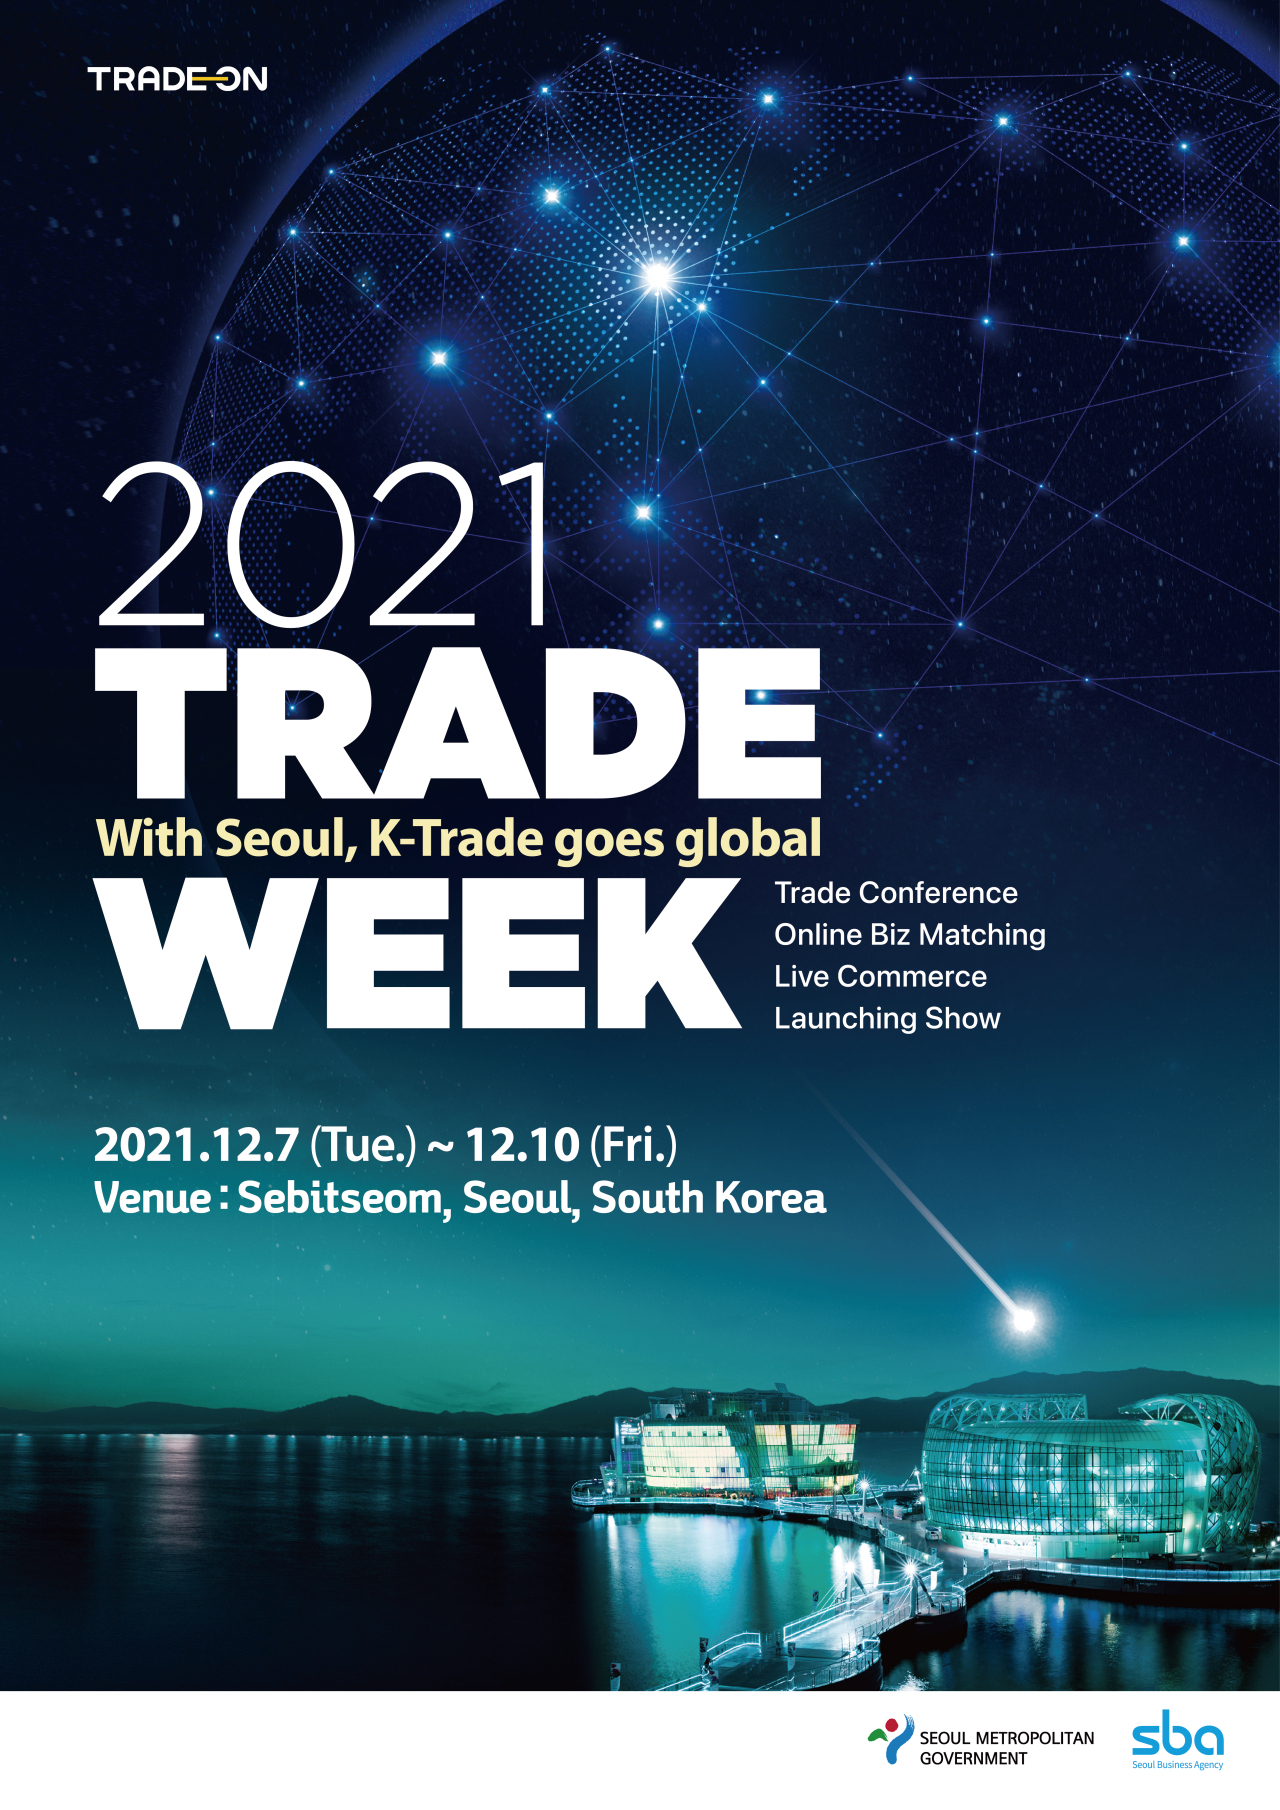 Poster image of 2021 Trade Week (Seoul Business Agency)